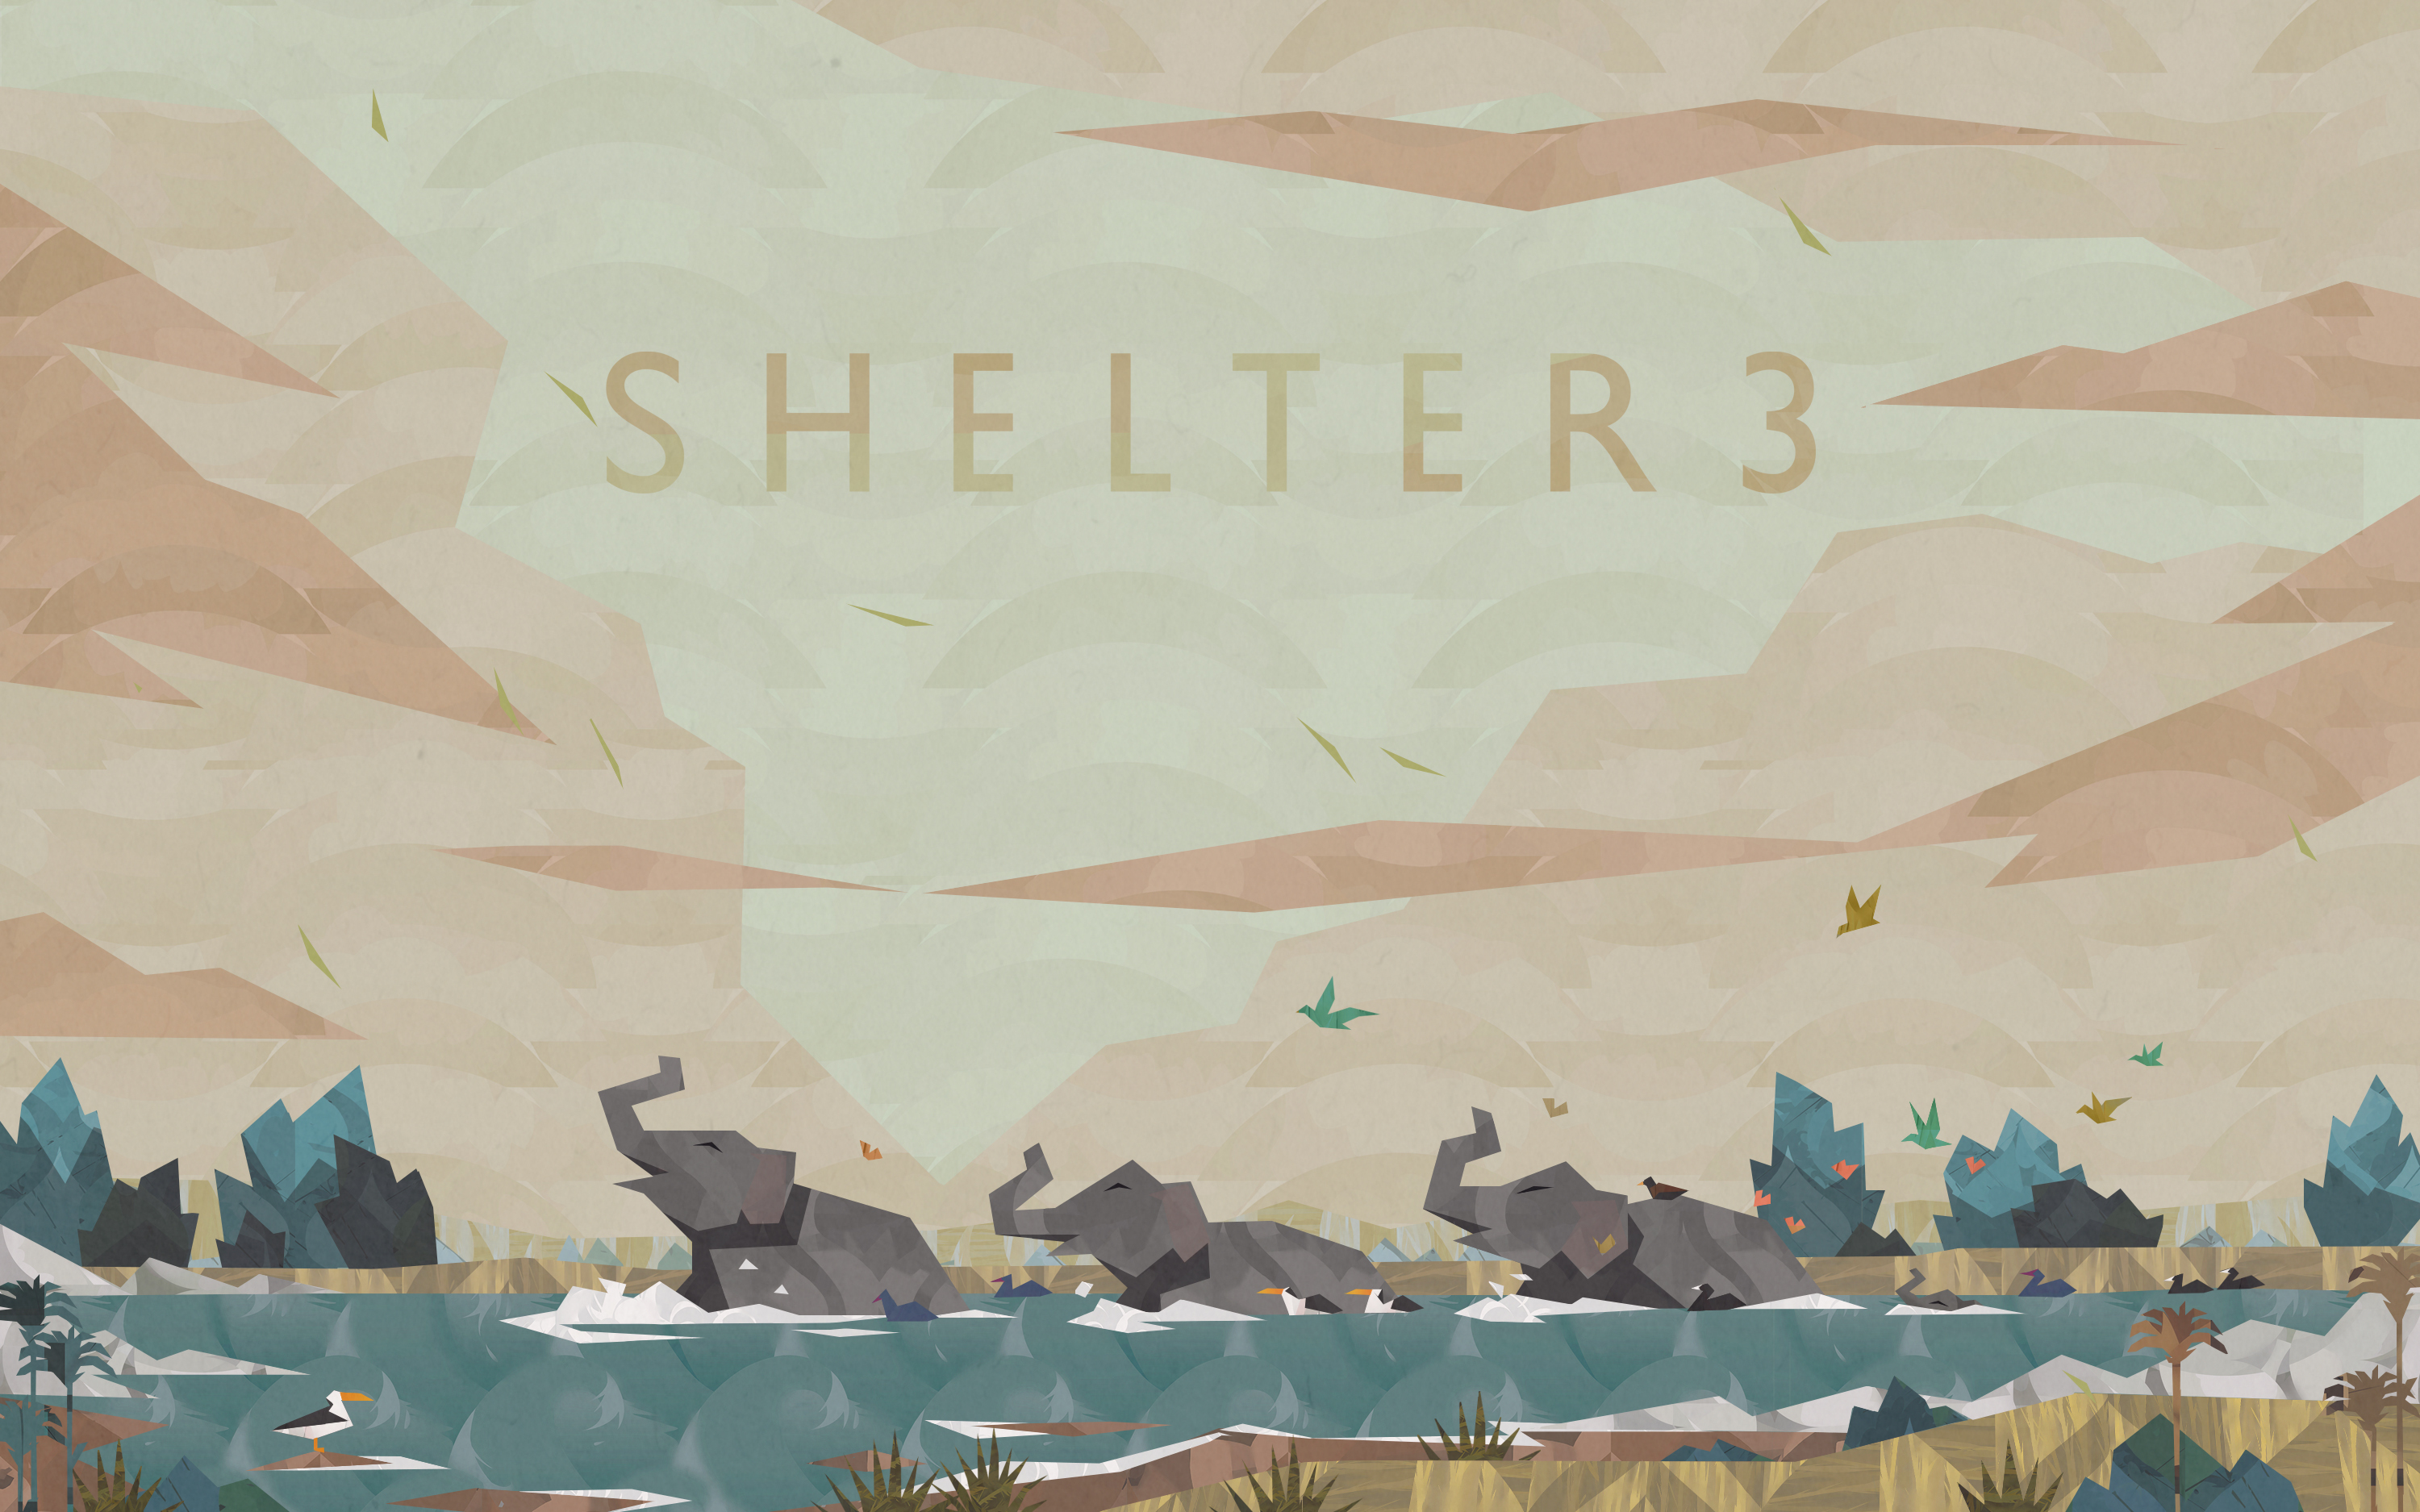 Shelter after. Shelter 3 игра. Шелтер Meadow. Shelter 2 арт. Shelter 1 игра.